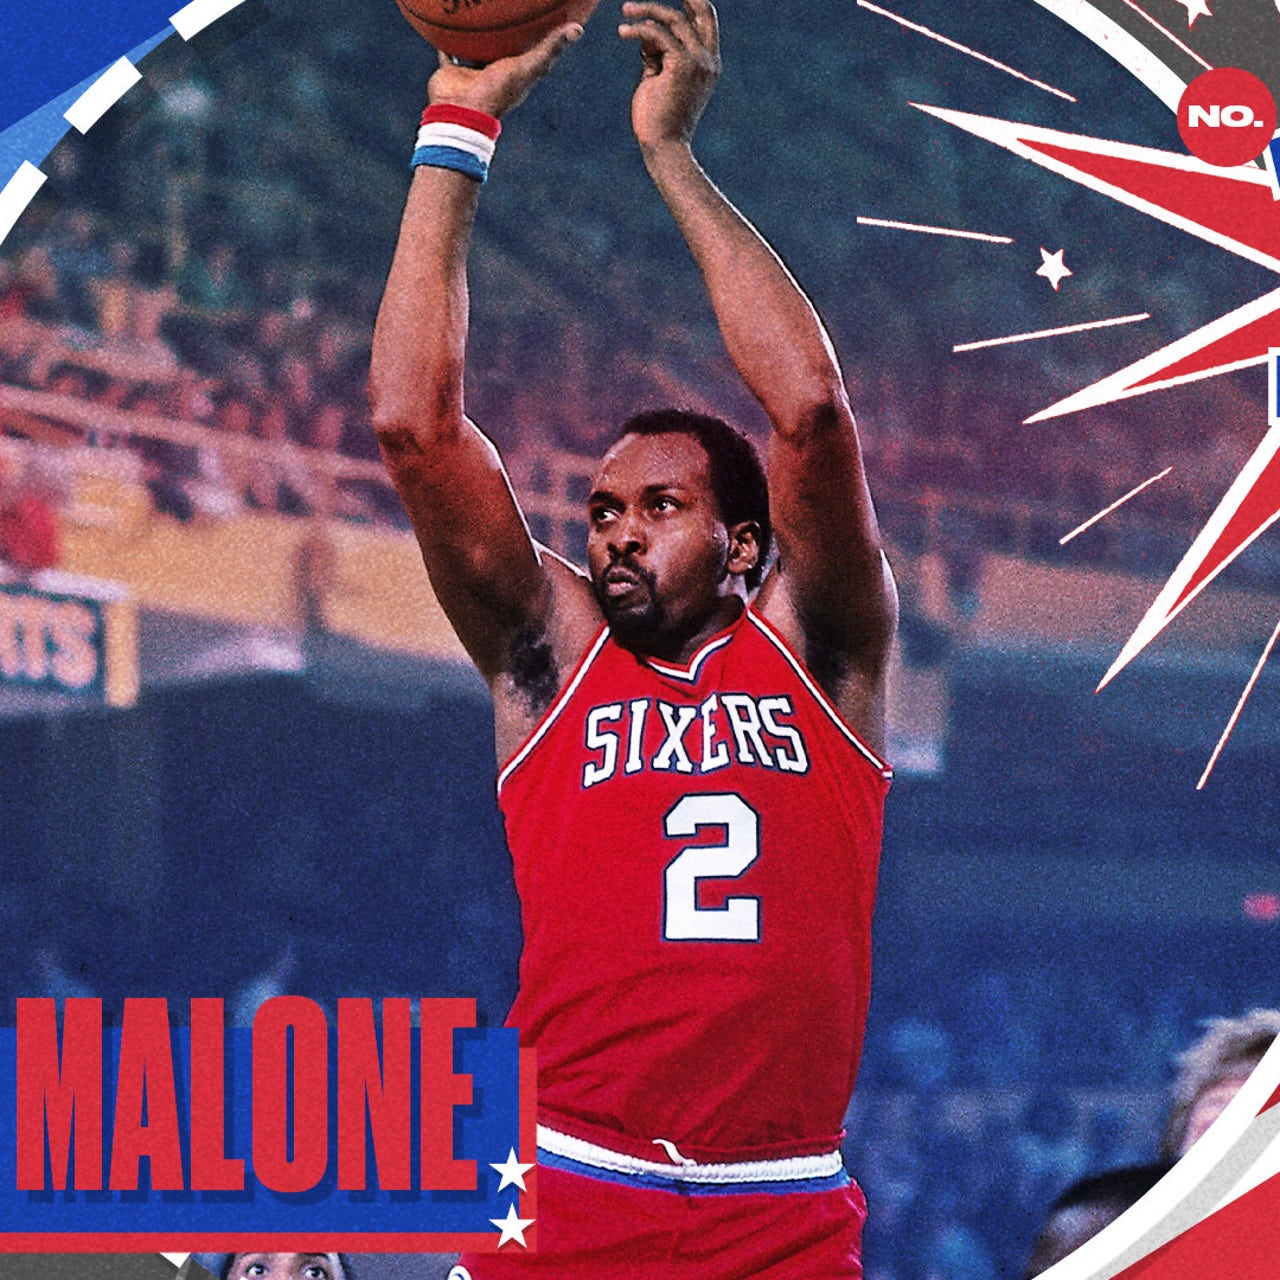 Crazy Stats - Moses Malone is the only player in league